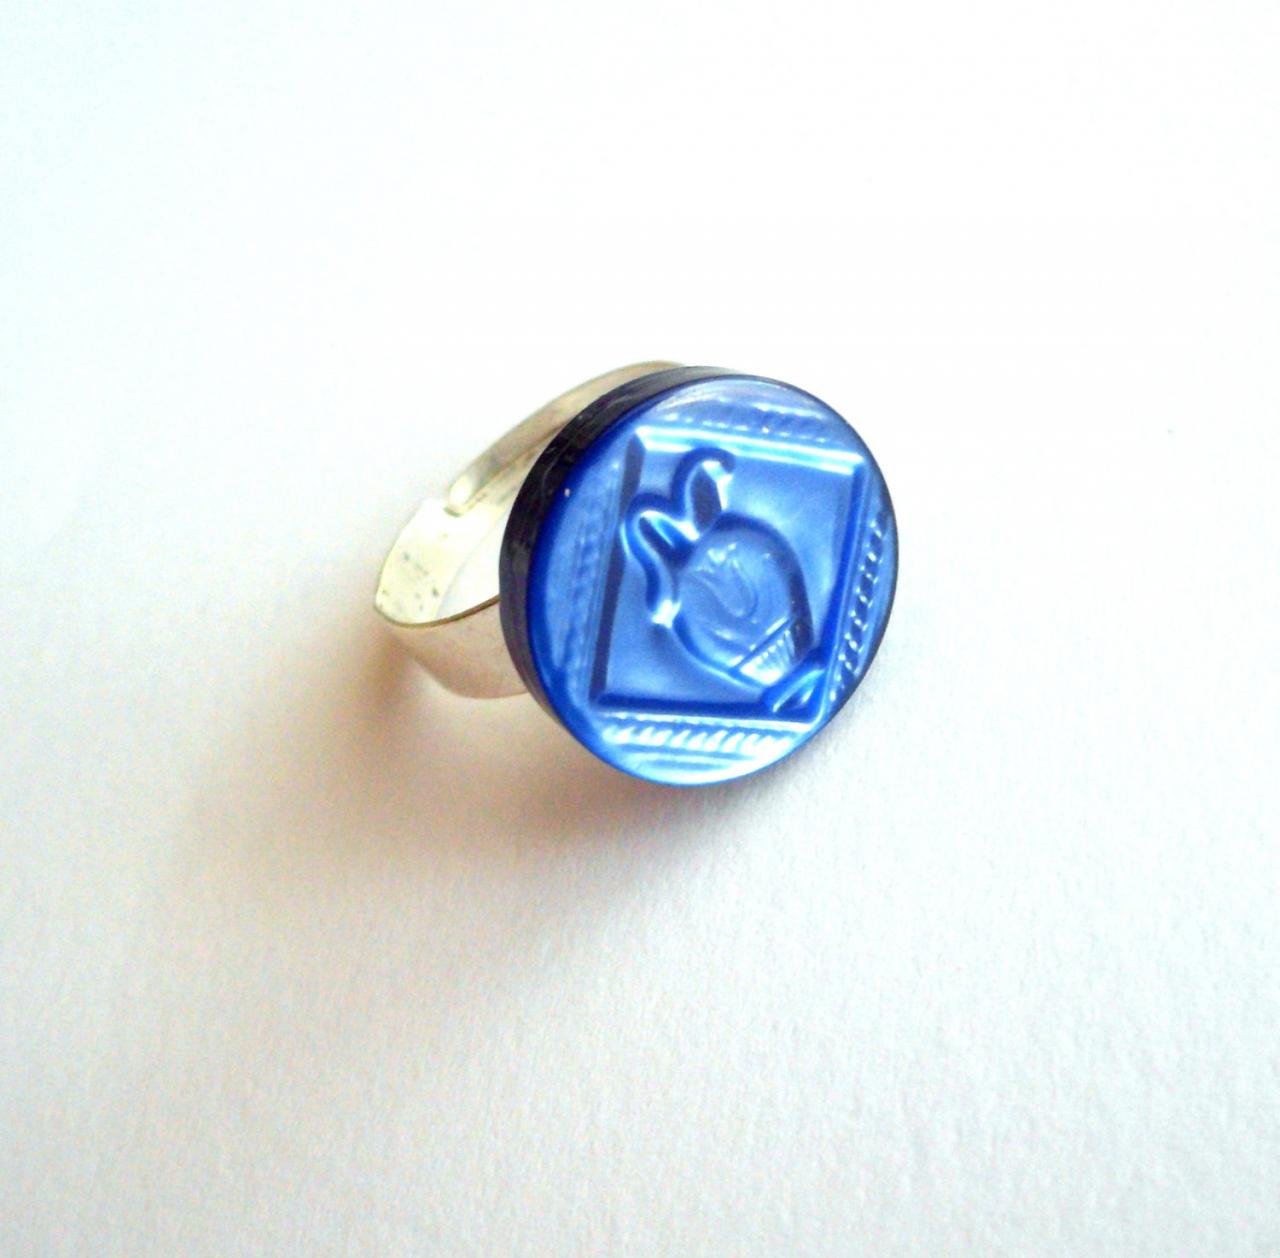 Deep Blue Adjustable Ring Made Of Vintage Button Eco-friendly, Cobalt Blue, Upcycled Jewelry, Recycled Jewelry